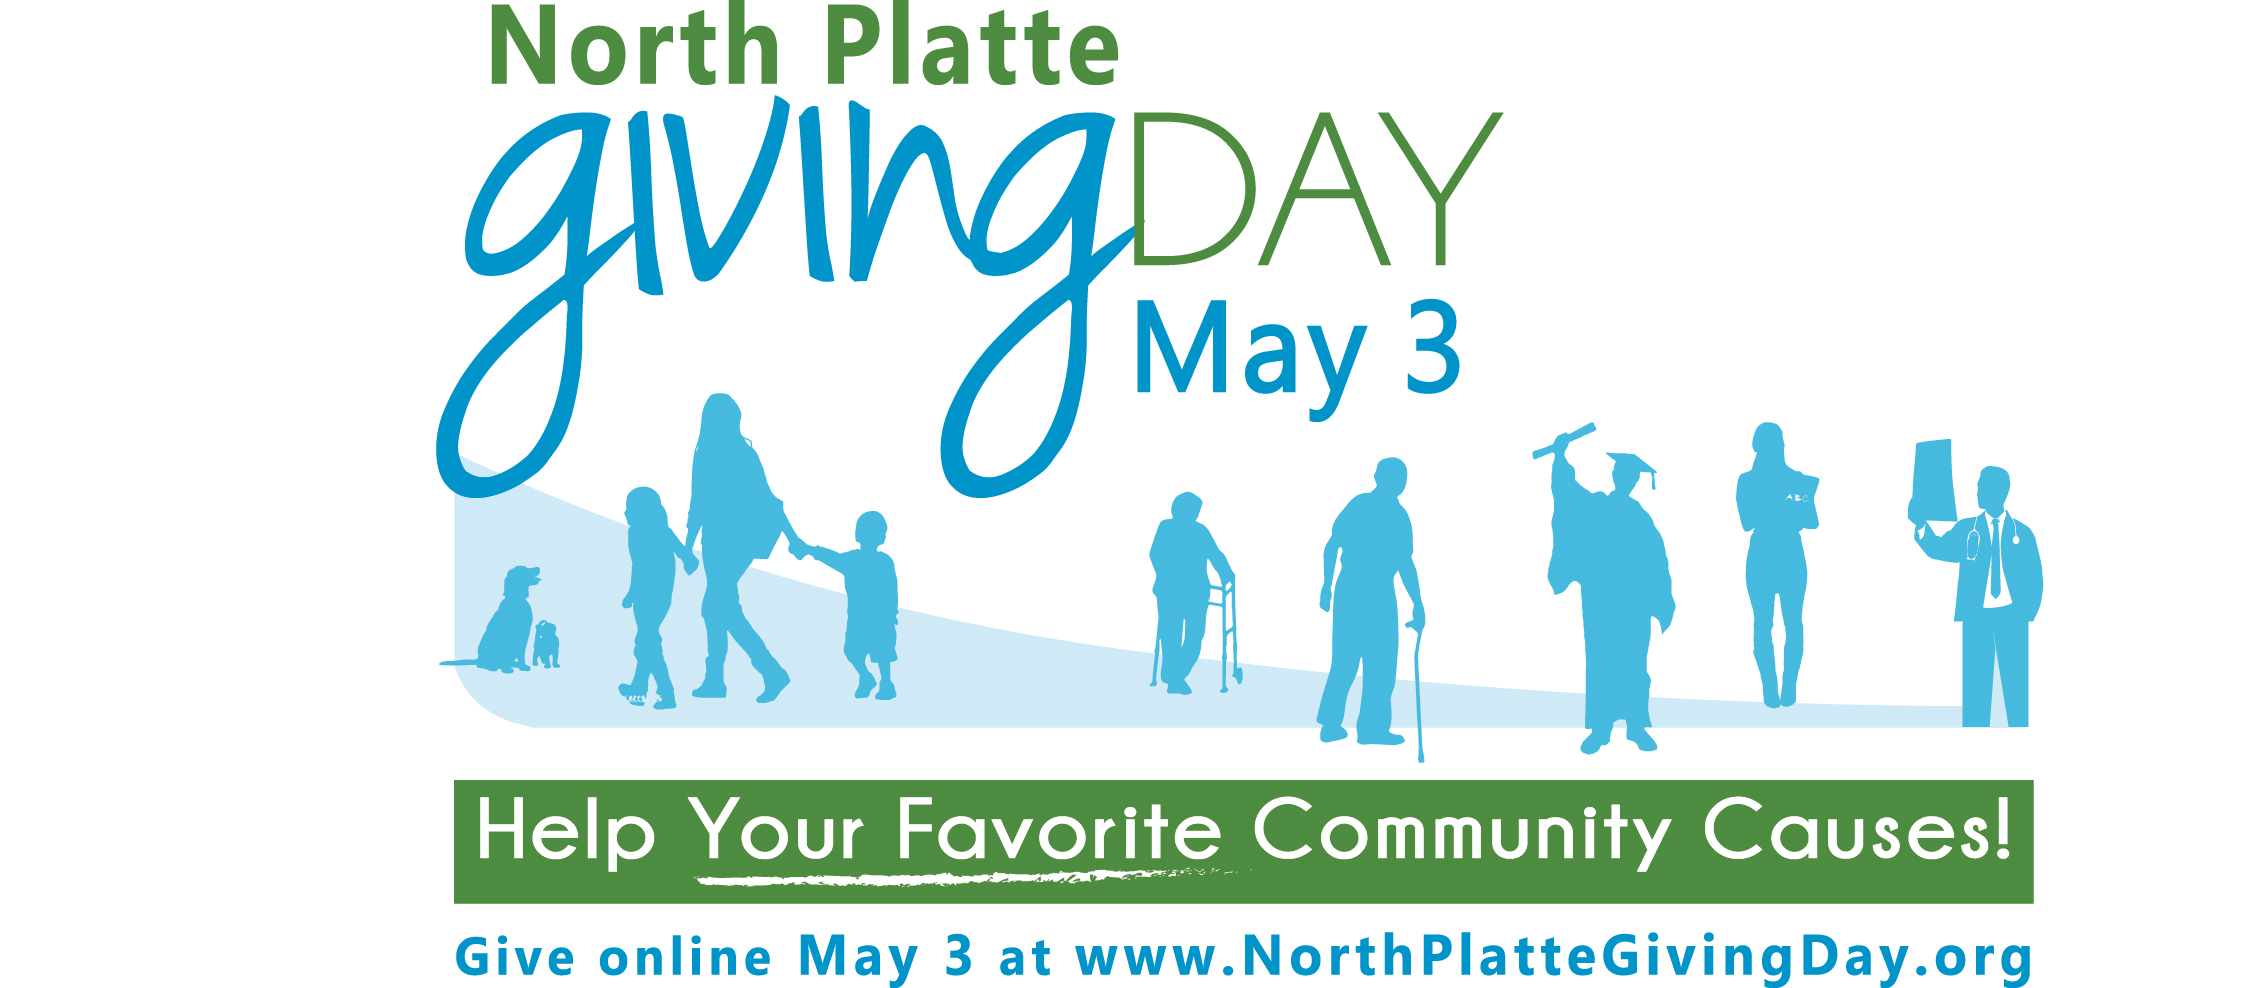 Image for North Platte Giving Day